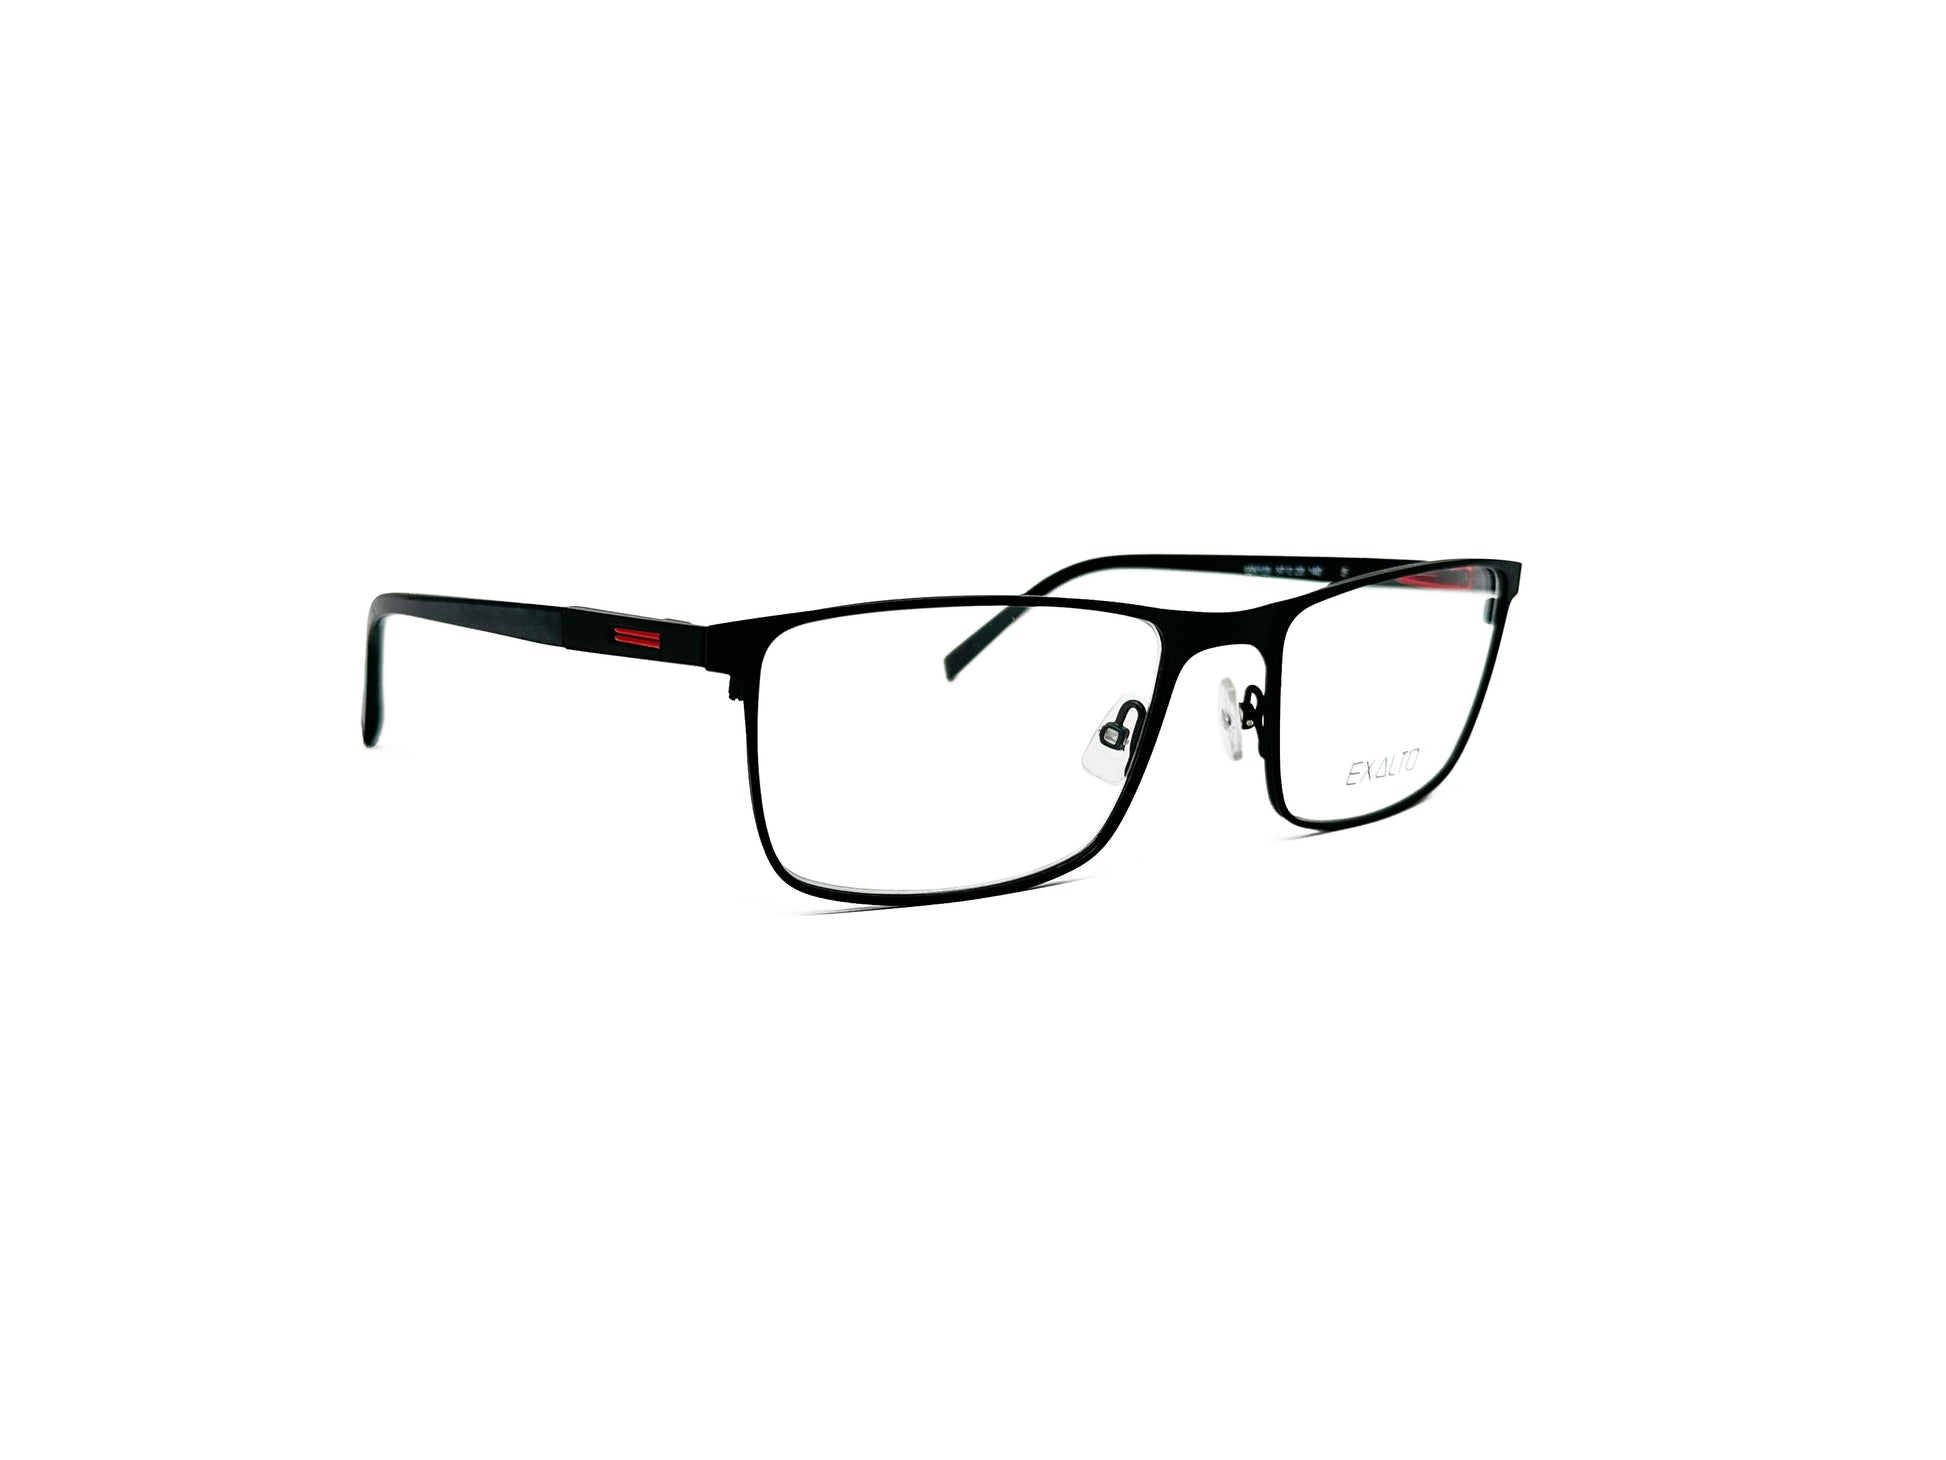 Exalto rectangular, metal optical frame. Model: 65N123. Color: Black with red strip on temple. Side view. 